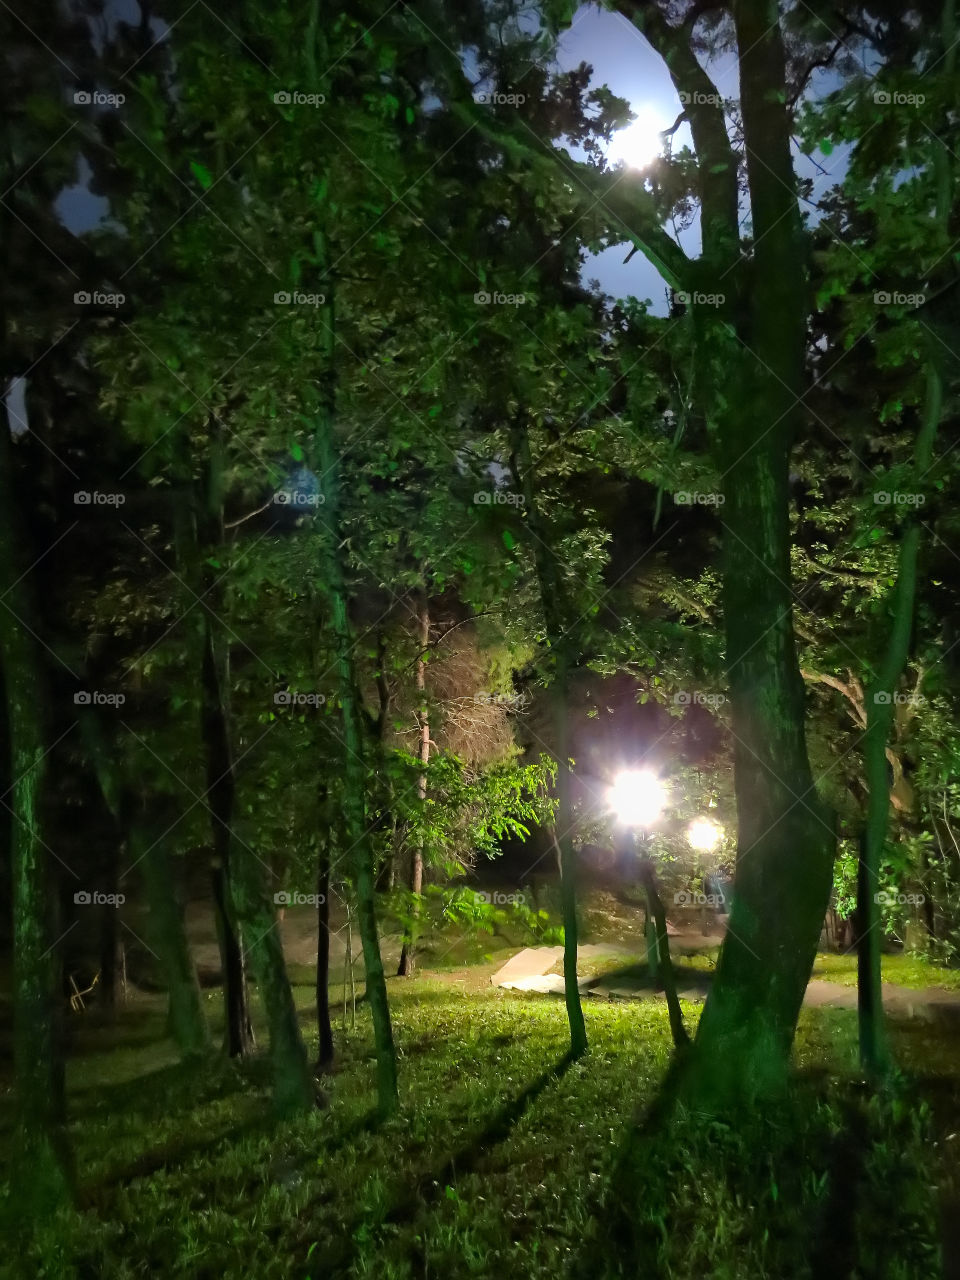 night forest, magical, mysterious, light, trees, south, Sochi, lantern, romance, sleep, midnight, walk, insomnia, August, greens, color,
stairs, stairs, stars, sky, landscape,